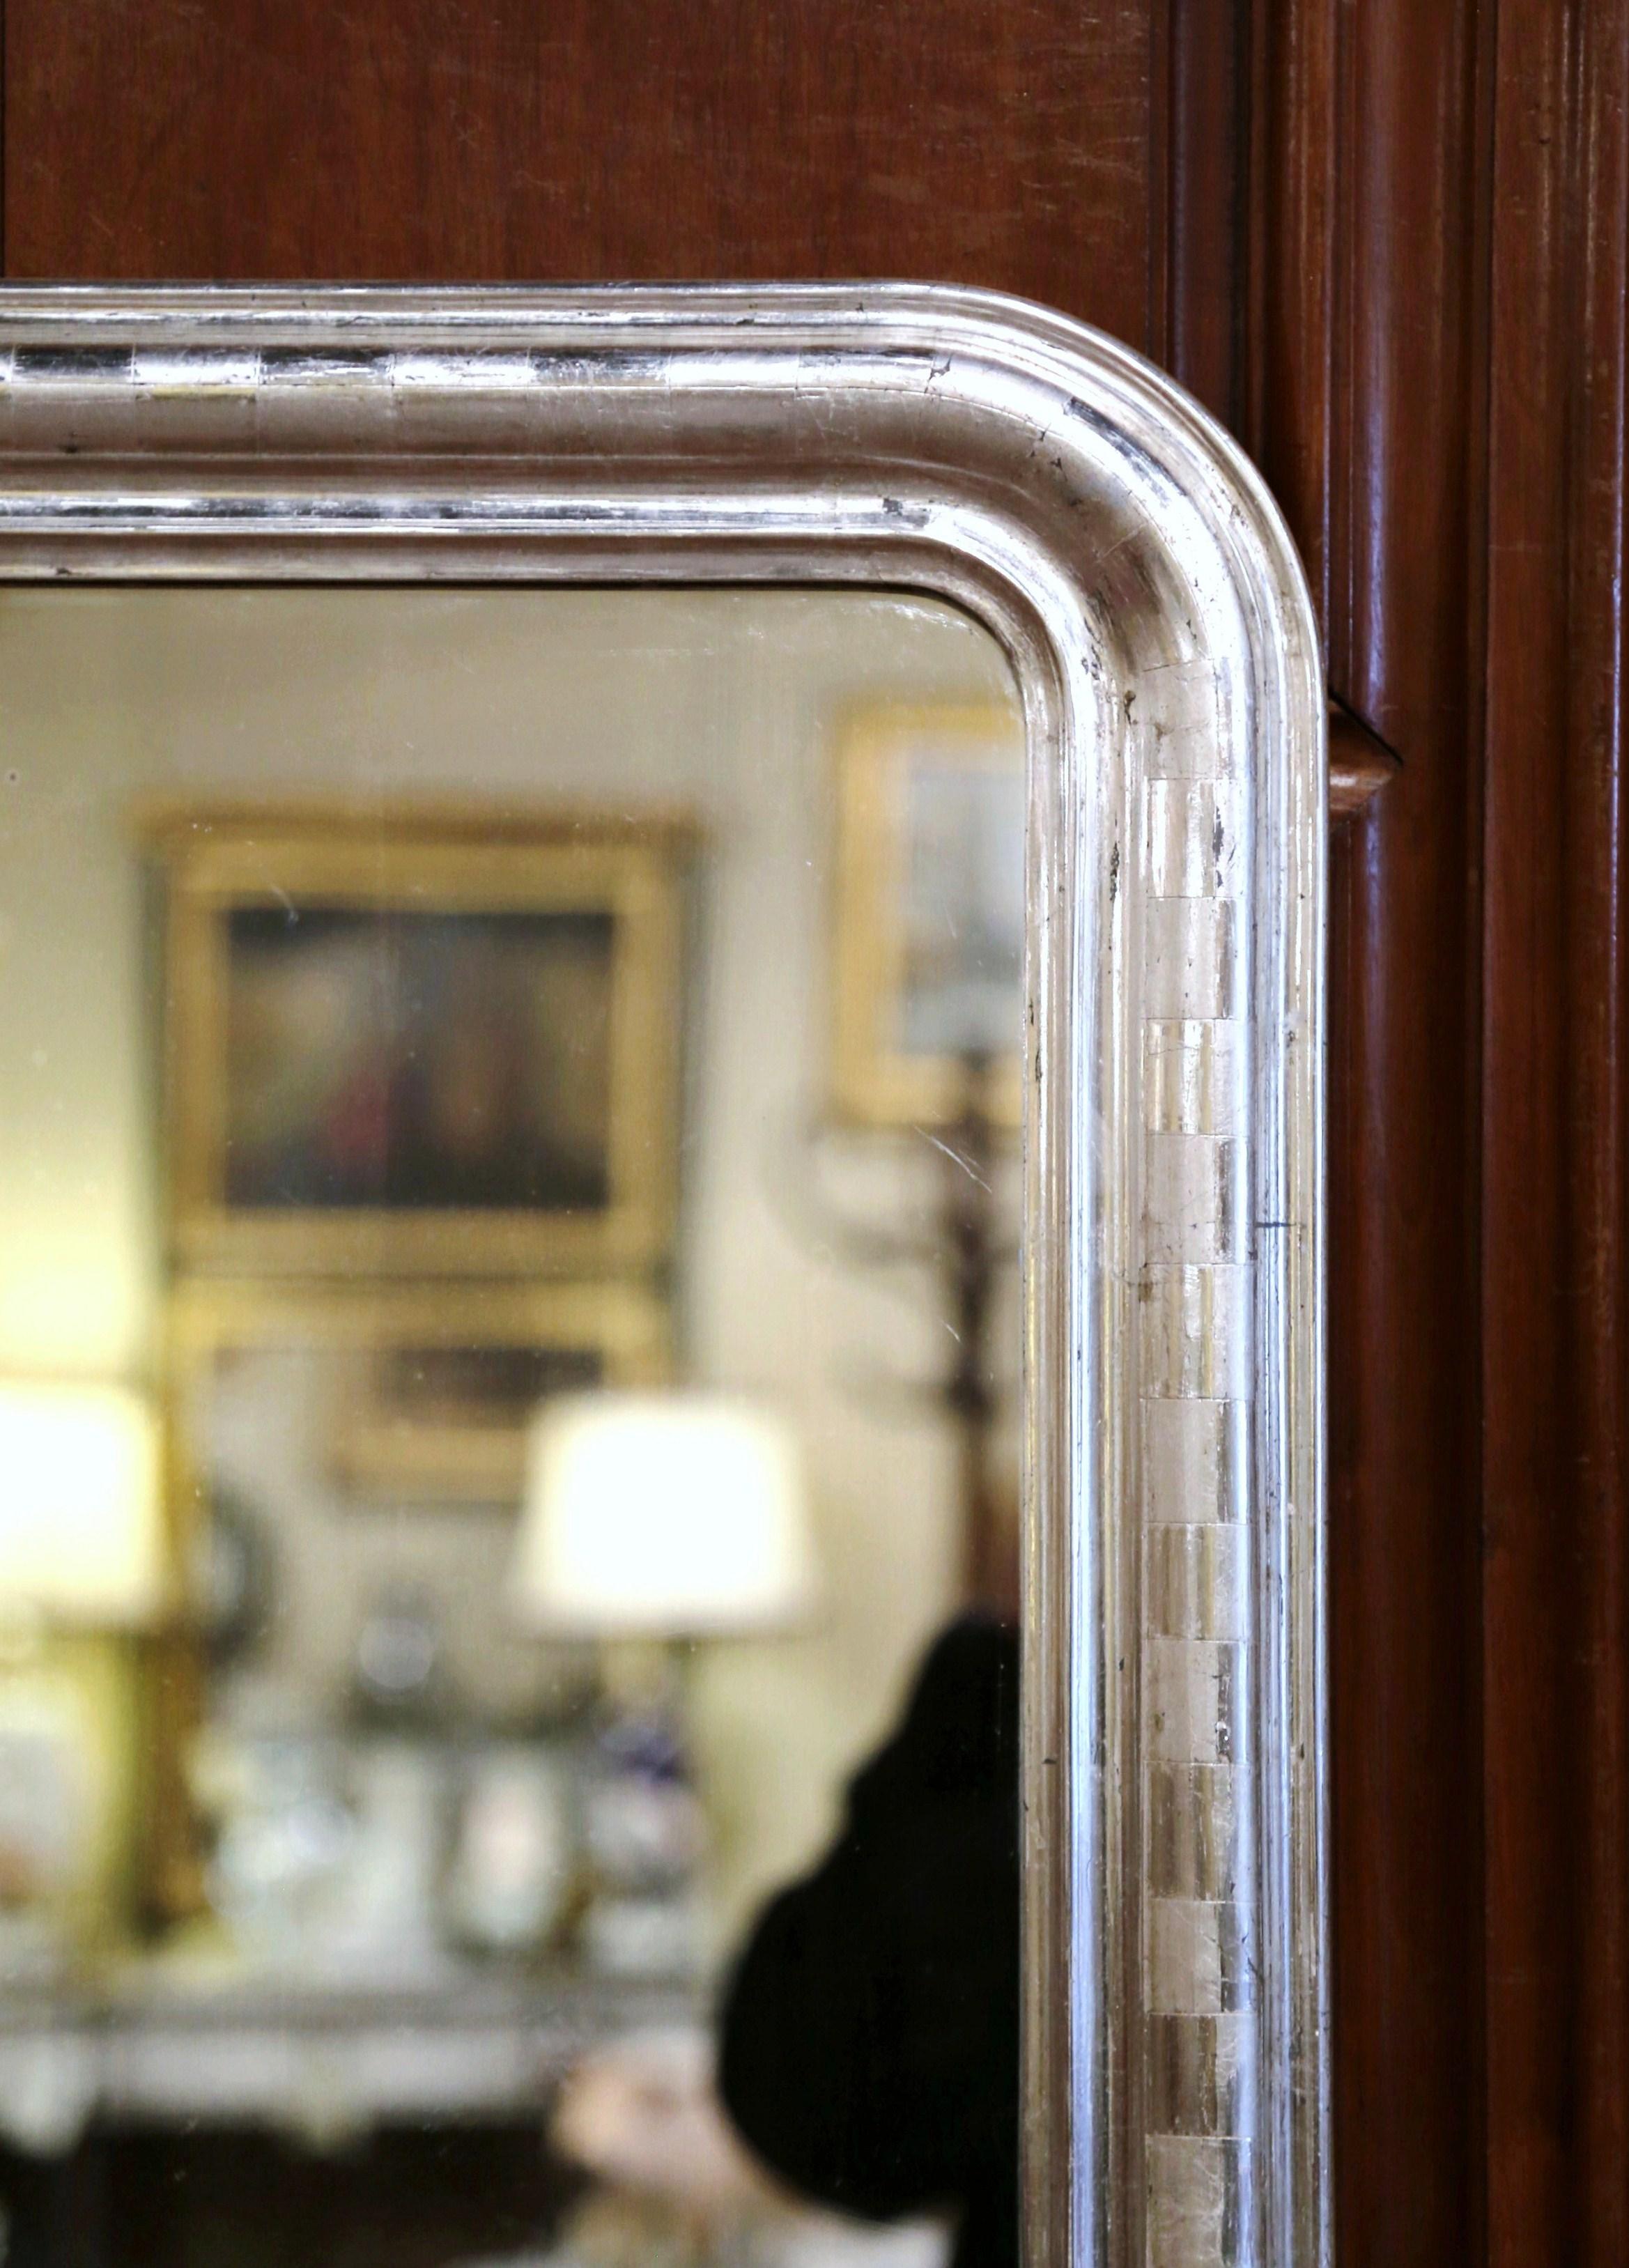 Crafted in the burgundy region of France, circa 1870, the antique mirror has traditional, timeless lines with rounded corners. The elegant frame is decorated with a luxurious silver leaf finish, which is further embellished with an engraved two-tone